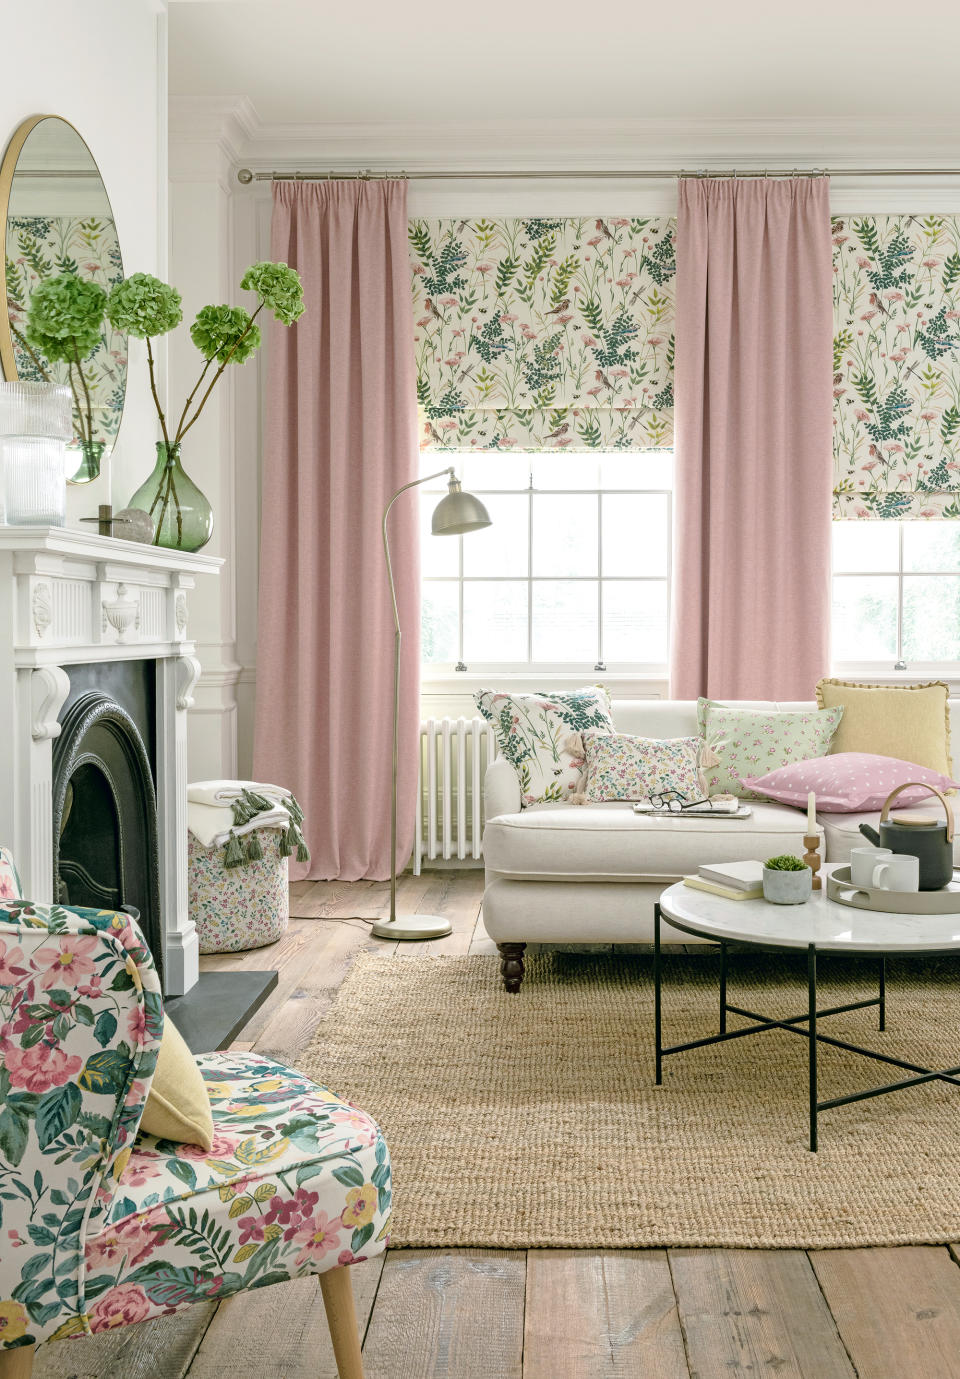 <p> For a relaxed and balanced living space, use plain blush pink curtains as a canvas to offset botanical prints and enhance the sense of light in the space. </p> <p> In this scheme by Clarke & Clarke, sash windows lend themselves to an elegant combination of Roman blinds in Gardenia in Blush, and sumptuous full-length curtains in Kelso in Blush. </p> <p> An accent chair and mix-and-match cushions tie the scheme together.    </p>